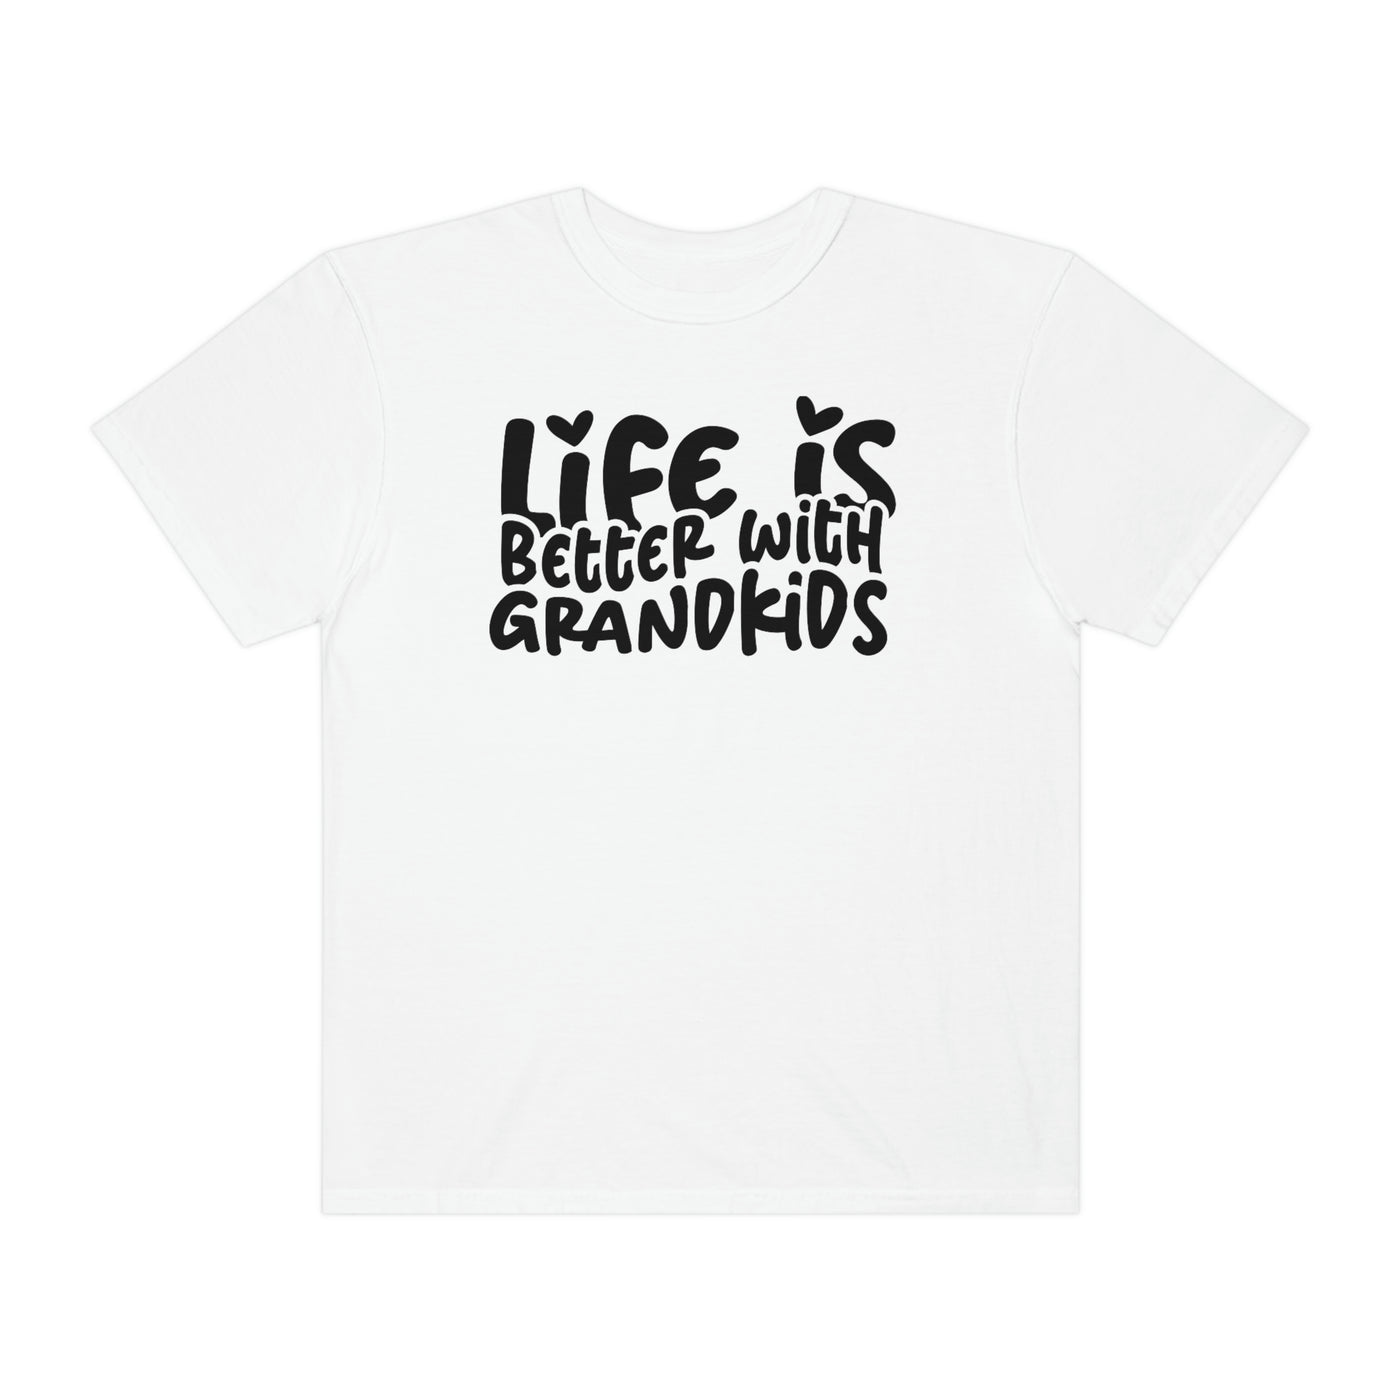 Life is Better With Grandkids Tee